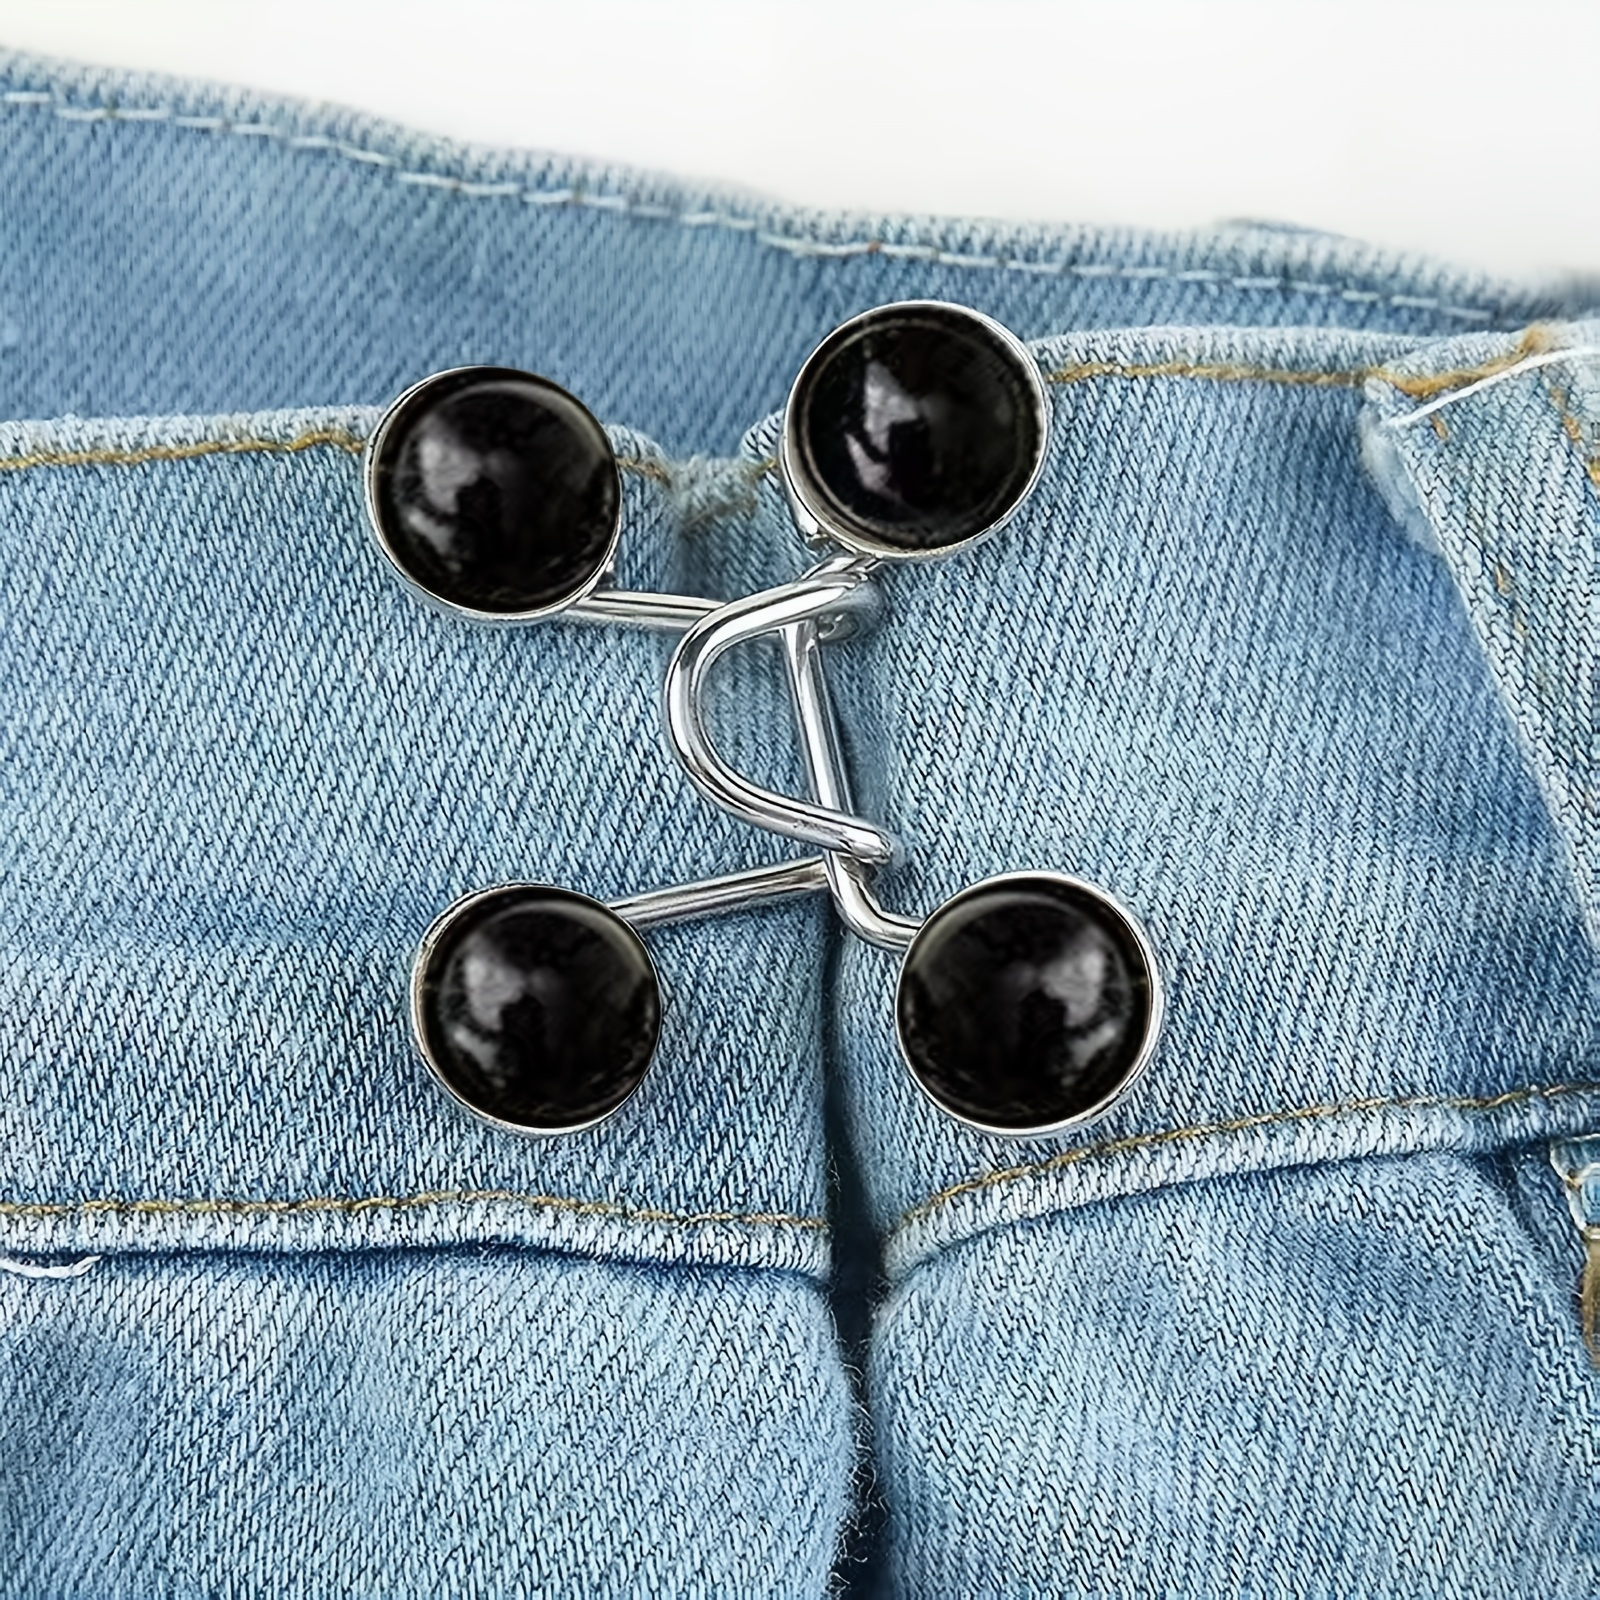 

1 Set Of Pant Waist Tightener Instant Jean Buttons For Loose Jeans Pants Clips For Waist Detachable Jean Buttons Pins No Sewing Waistband Tightener